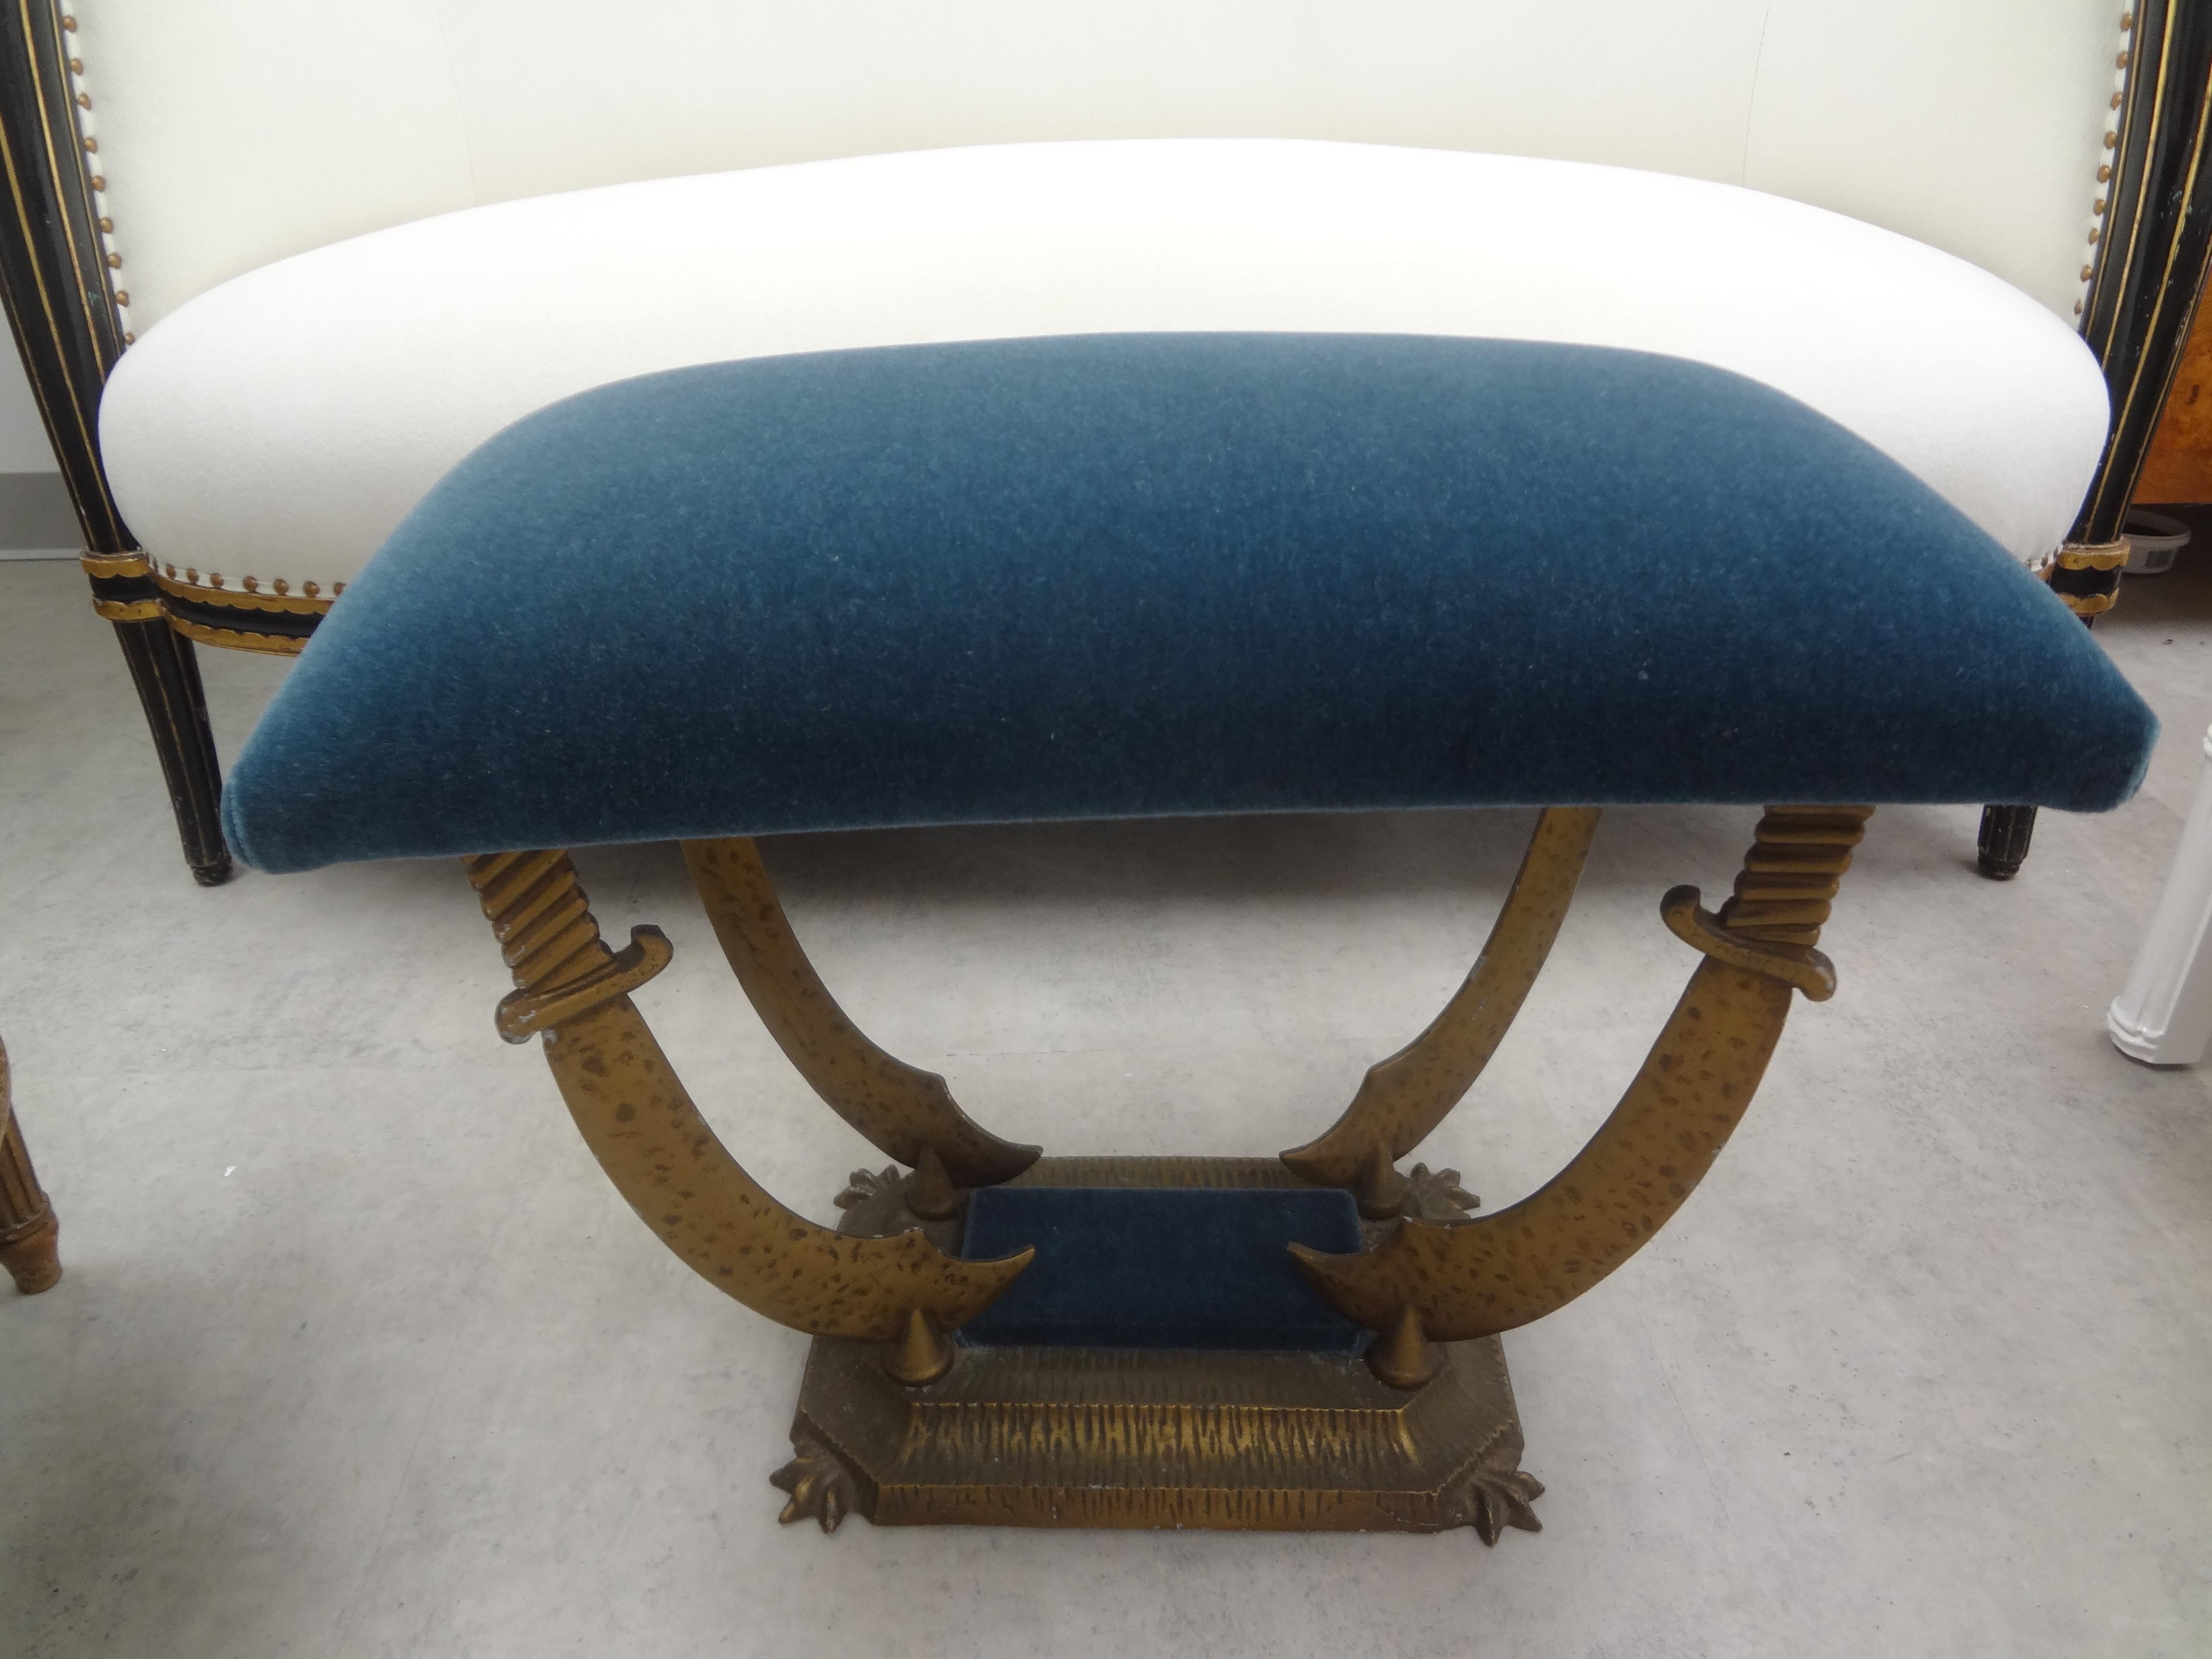 Hollywood Regency bronzed iron saber or sword bench. This charming vintage bench, stool or ottoman has been newly upholstered in push blue mohair fabric.